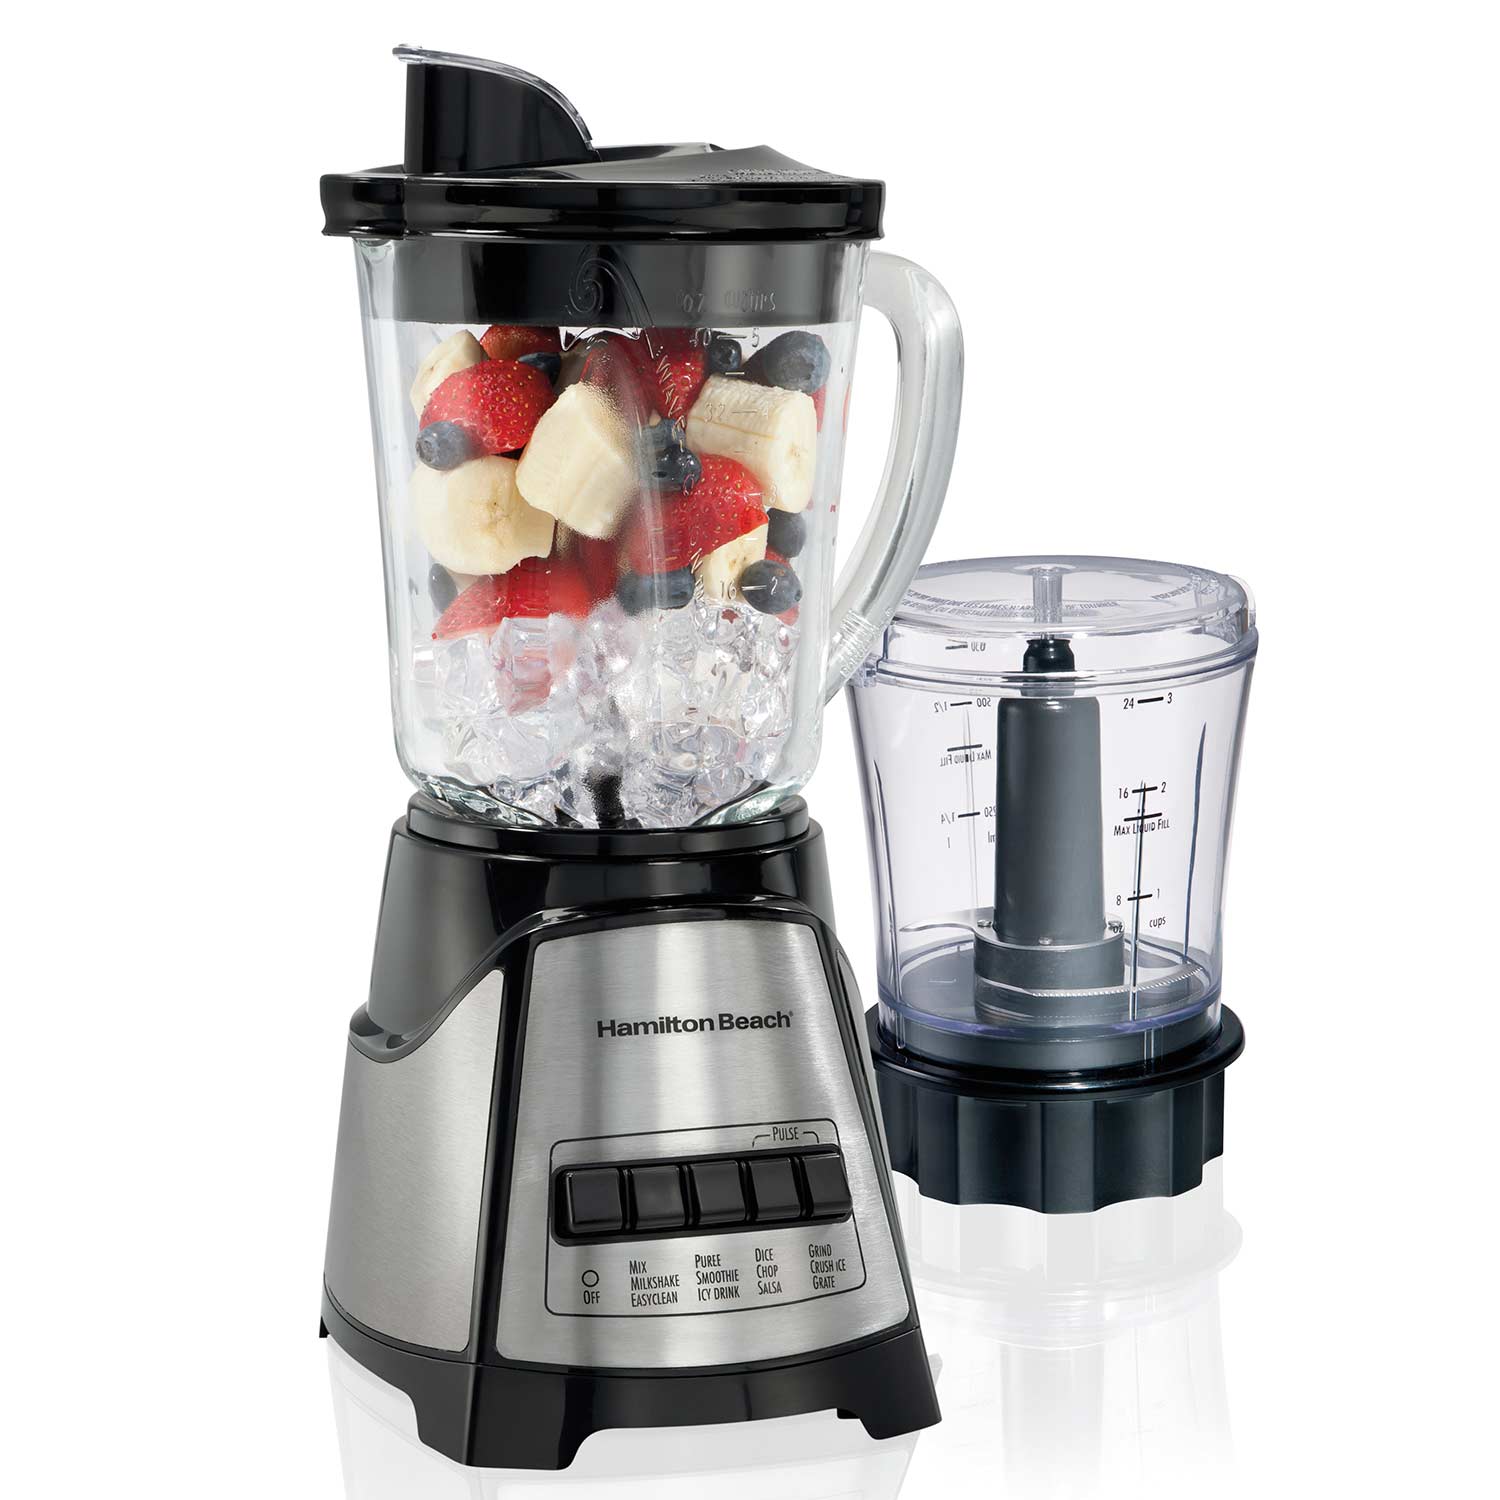 12 Function Blender & Chopper with Mess-free 40oz Glass Jar, 700W Black & Stainless (58149)